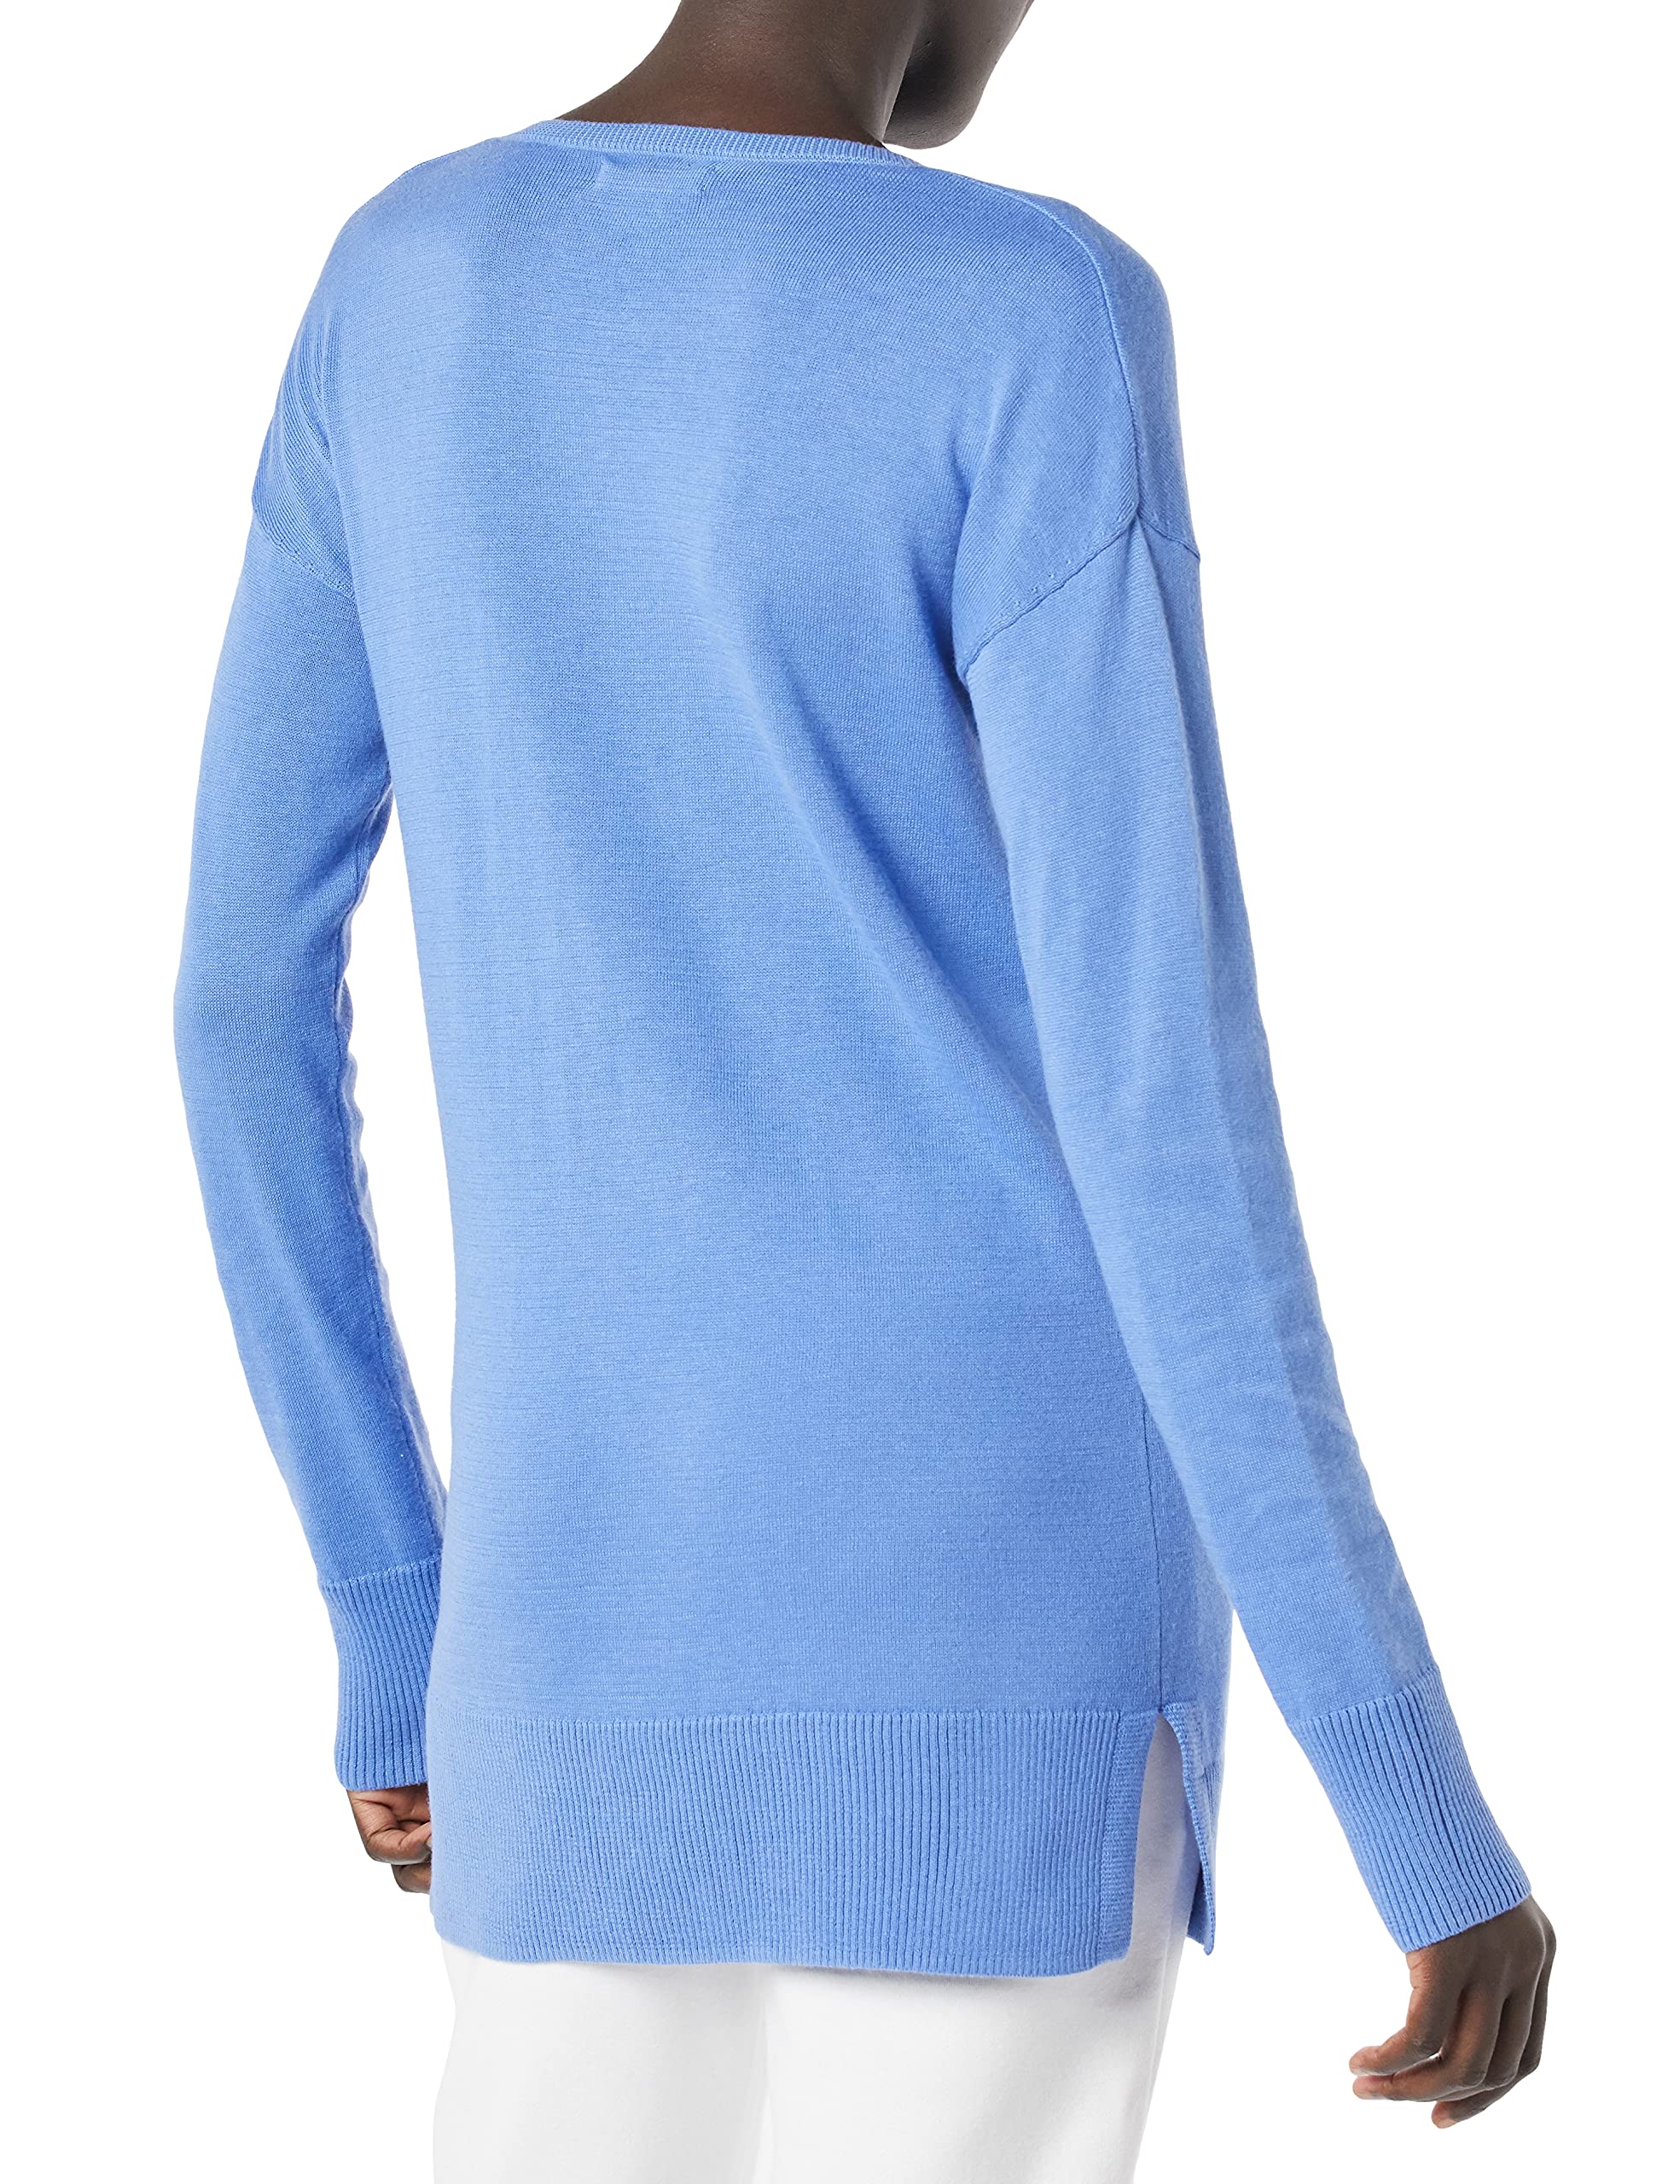 Amazon Essentials Women's Lightweight Long-Sleeve V-Neck Tunic Sweater (Available in Plus Size)